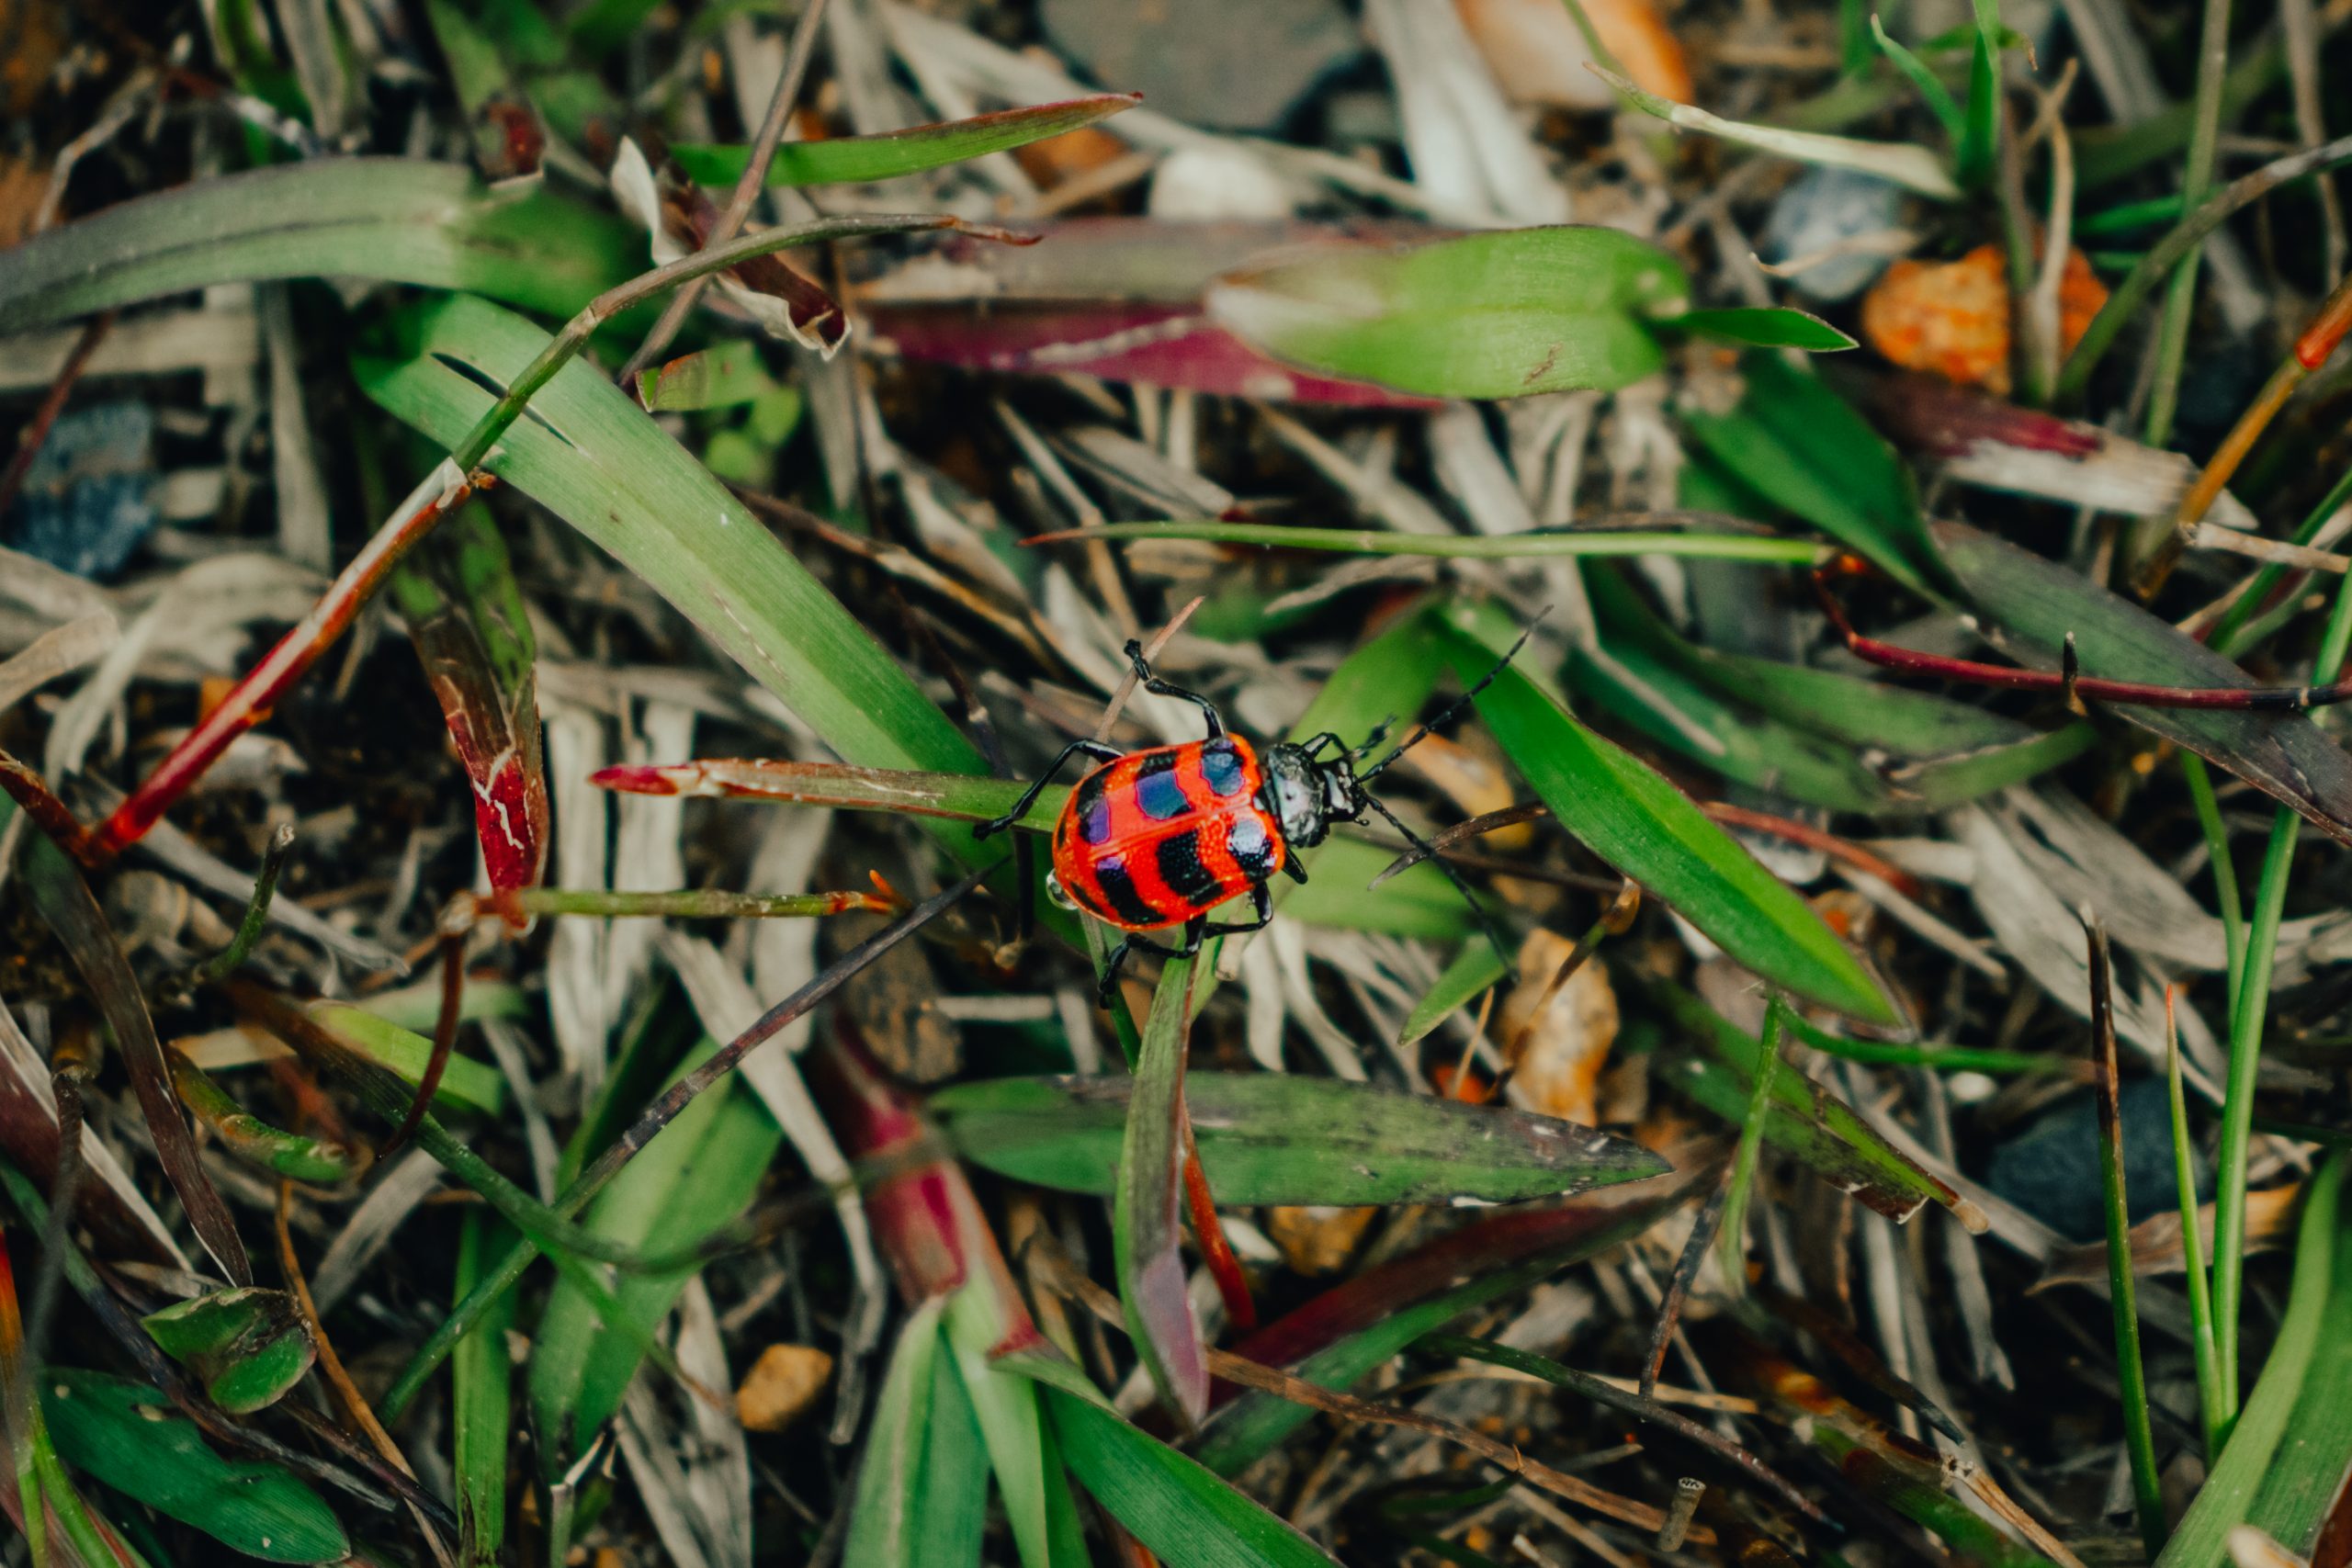 Red bug on the grass